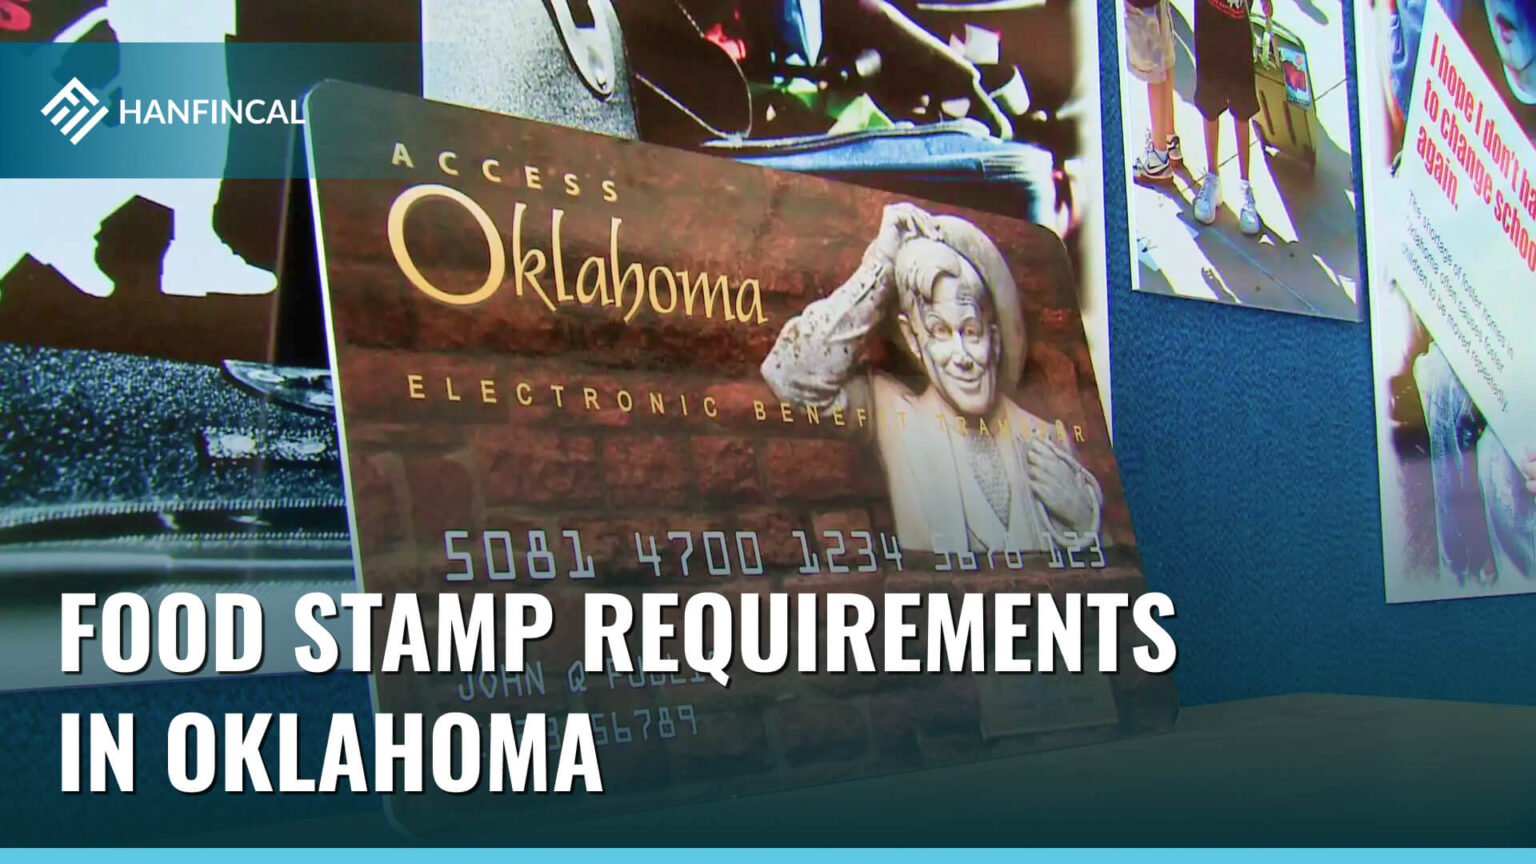 How to apply for Food Stamps in Oklahoma (02/2023)? Hanfincal